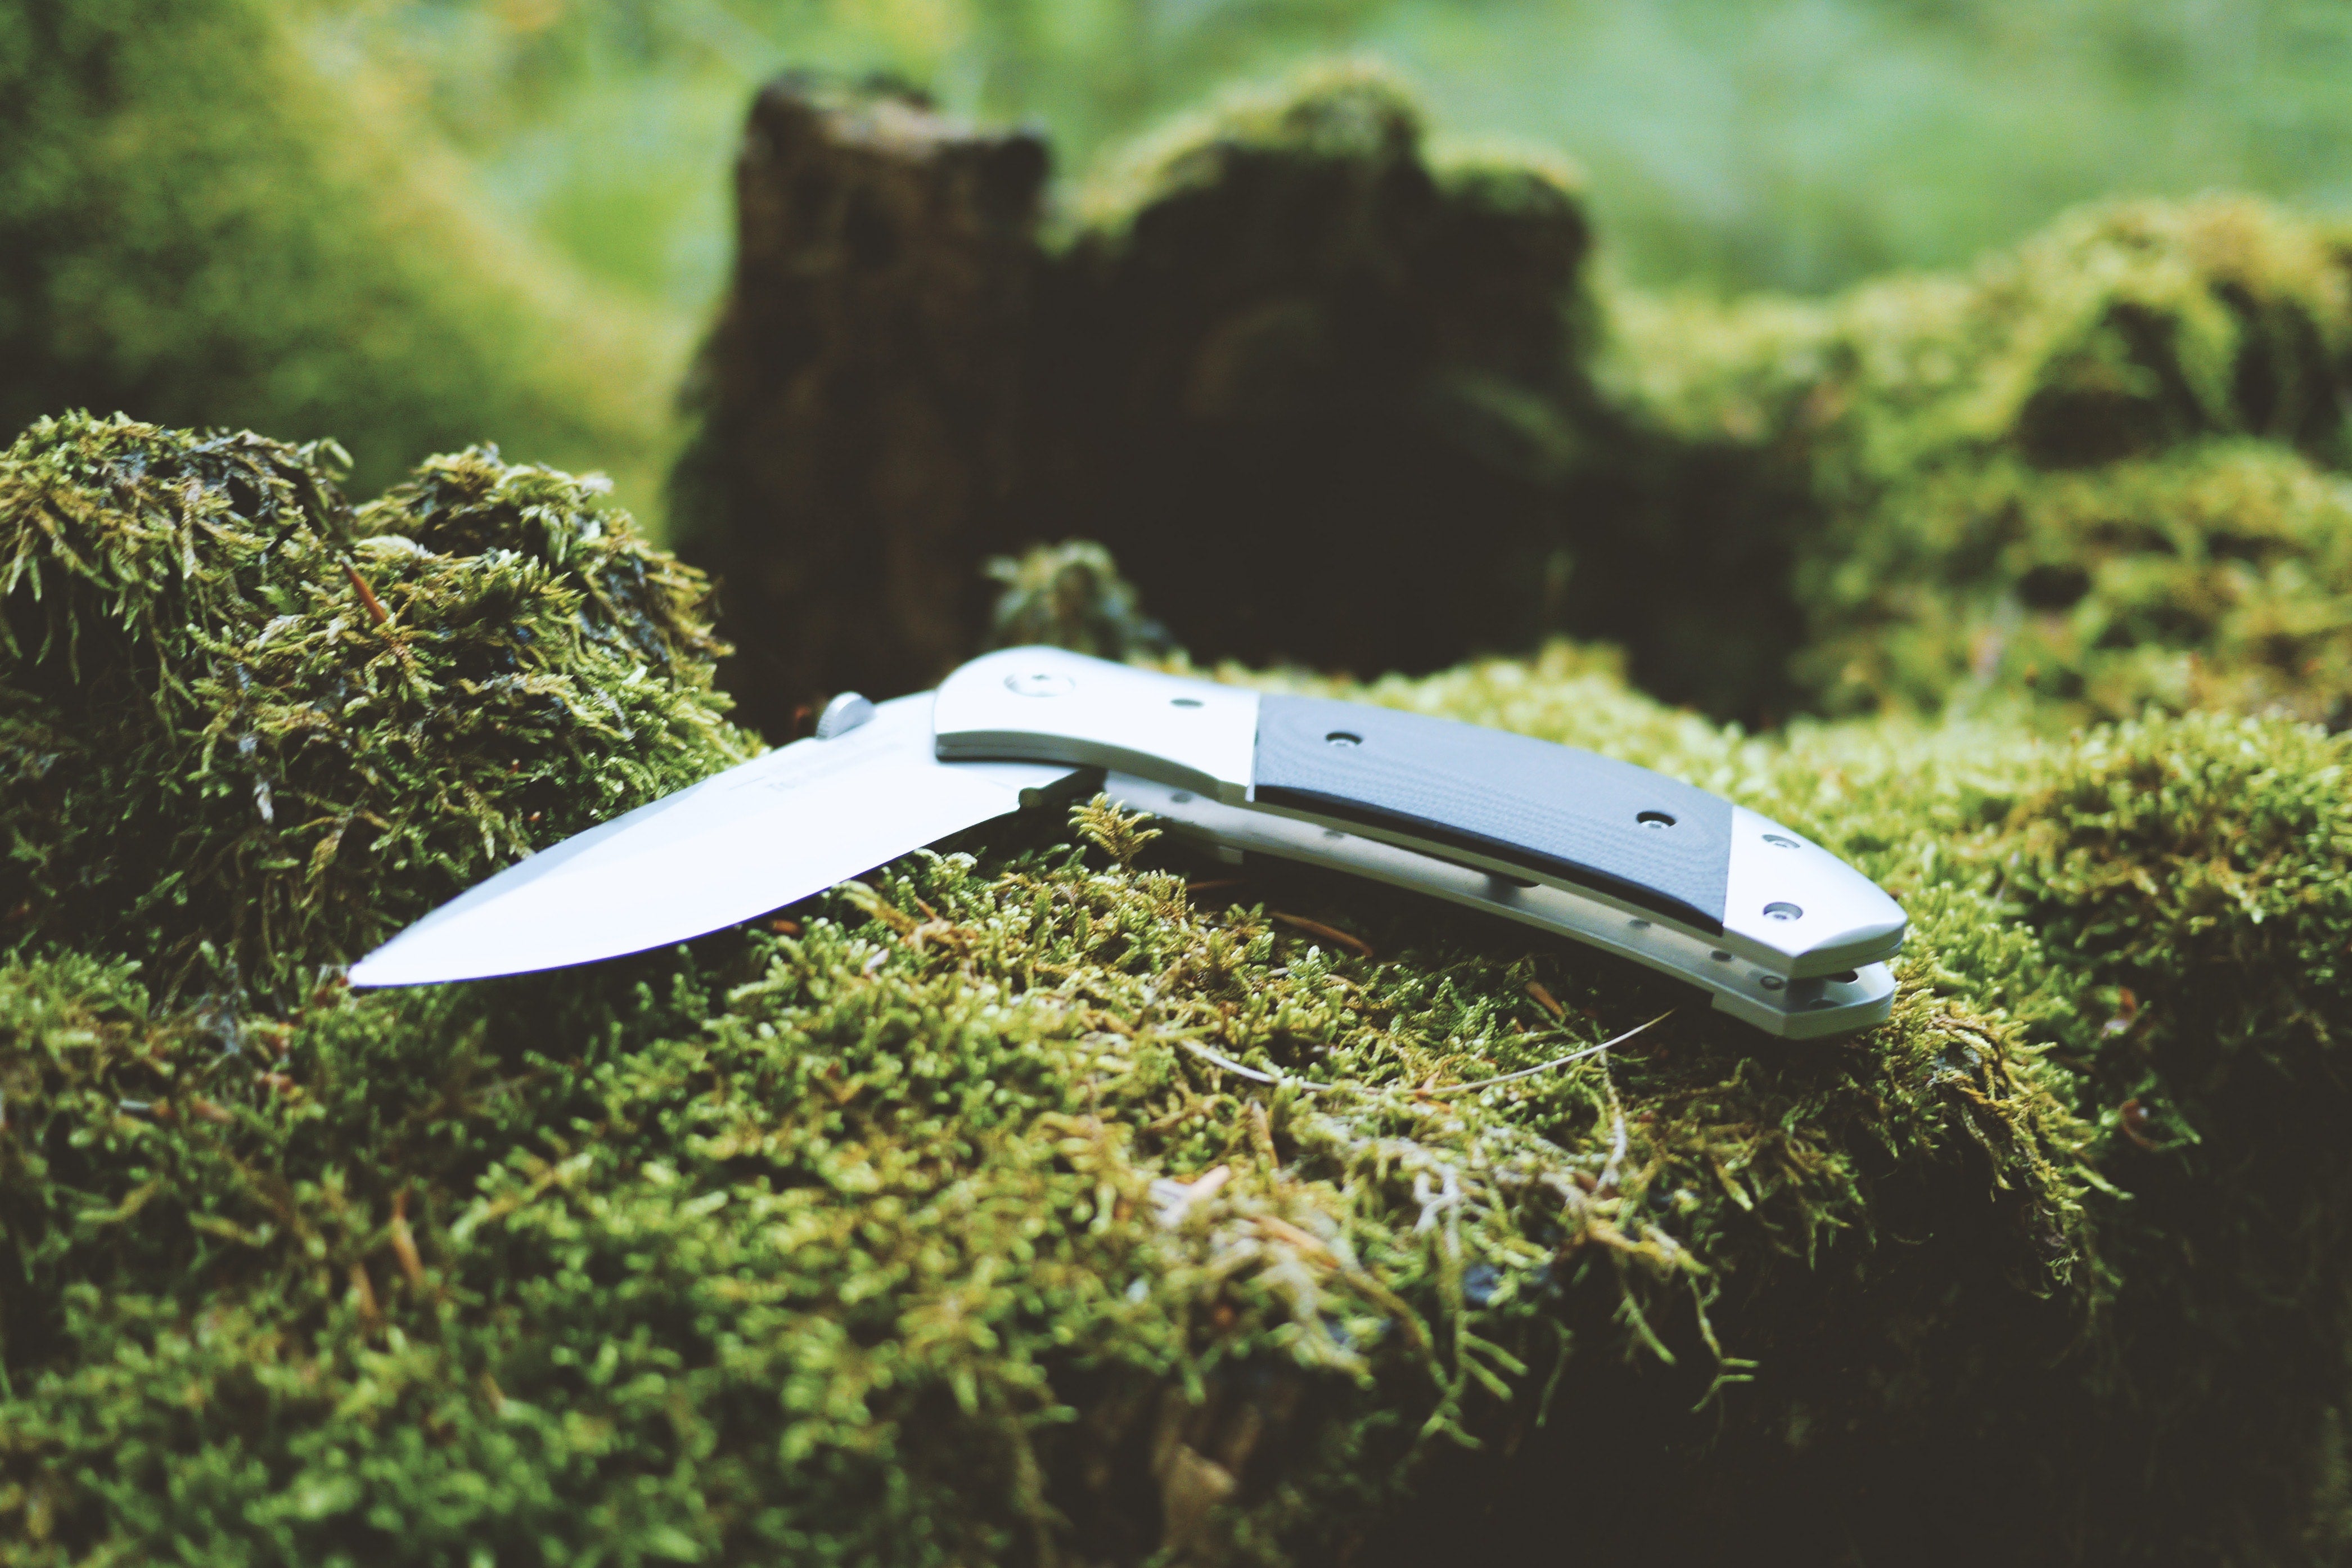 Knife Aid's Top 10 most iconic practical and utility knives